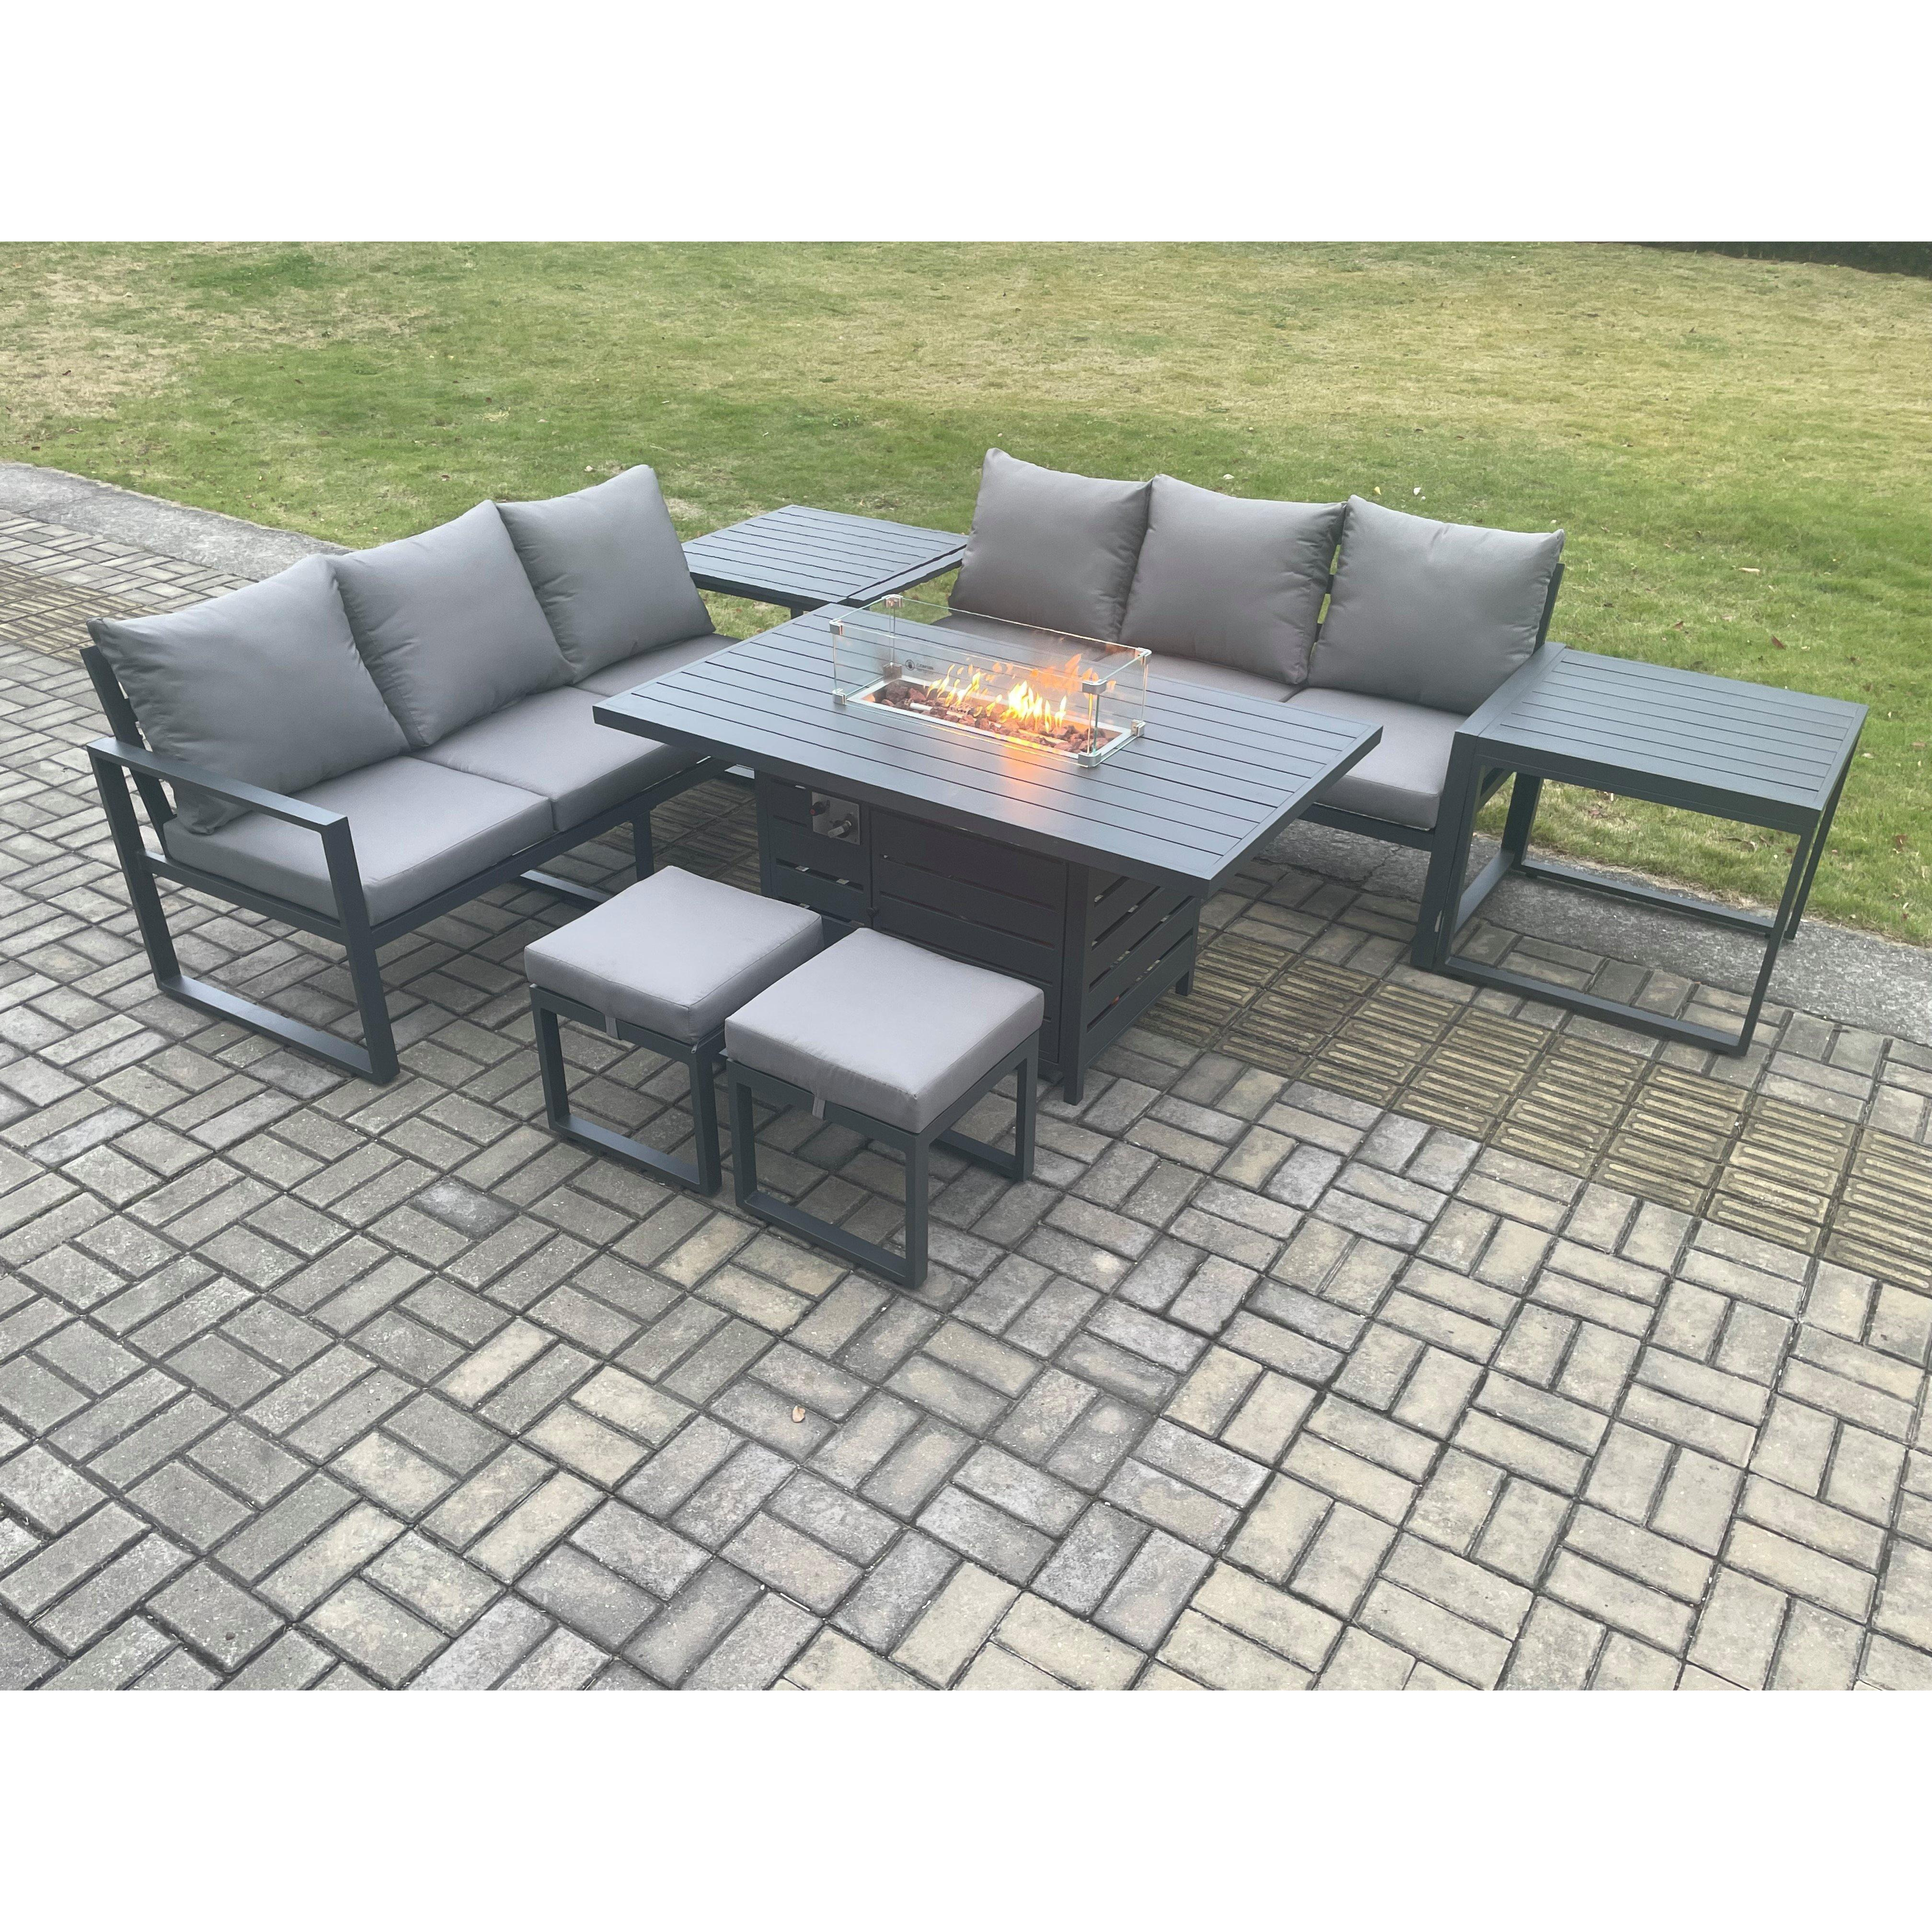 Aluminium 8 Seater Outdoor Garden Furniture Lounge Sofa Set Gas Fire Pit Dining Table with 2 Small Footstools 2 Side Tables Dark Grey - image 1